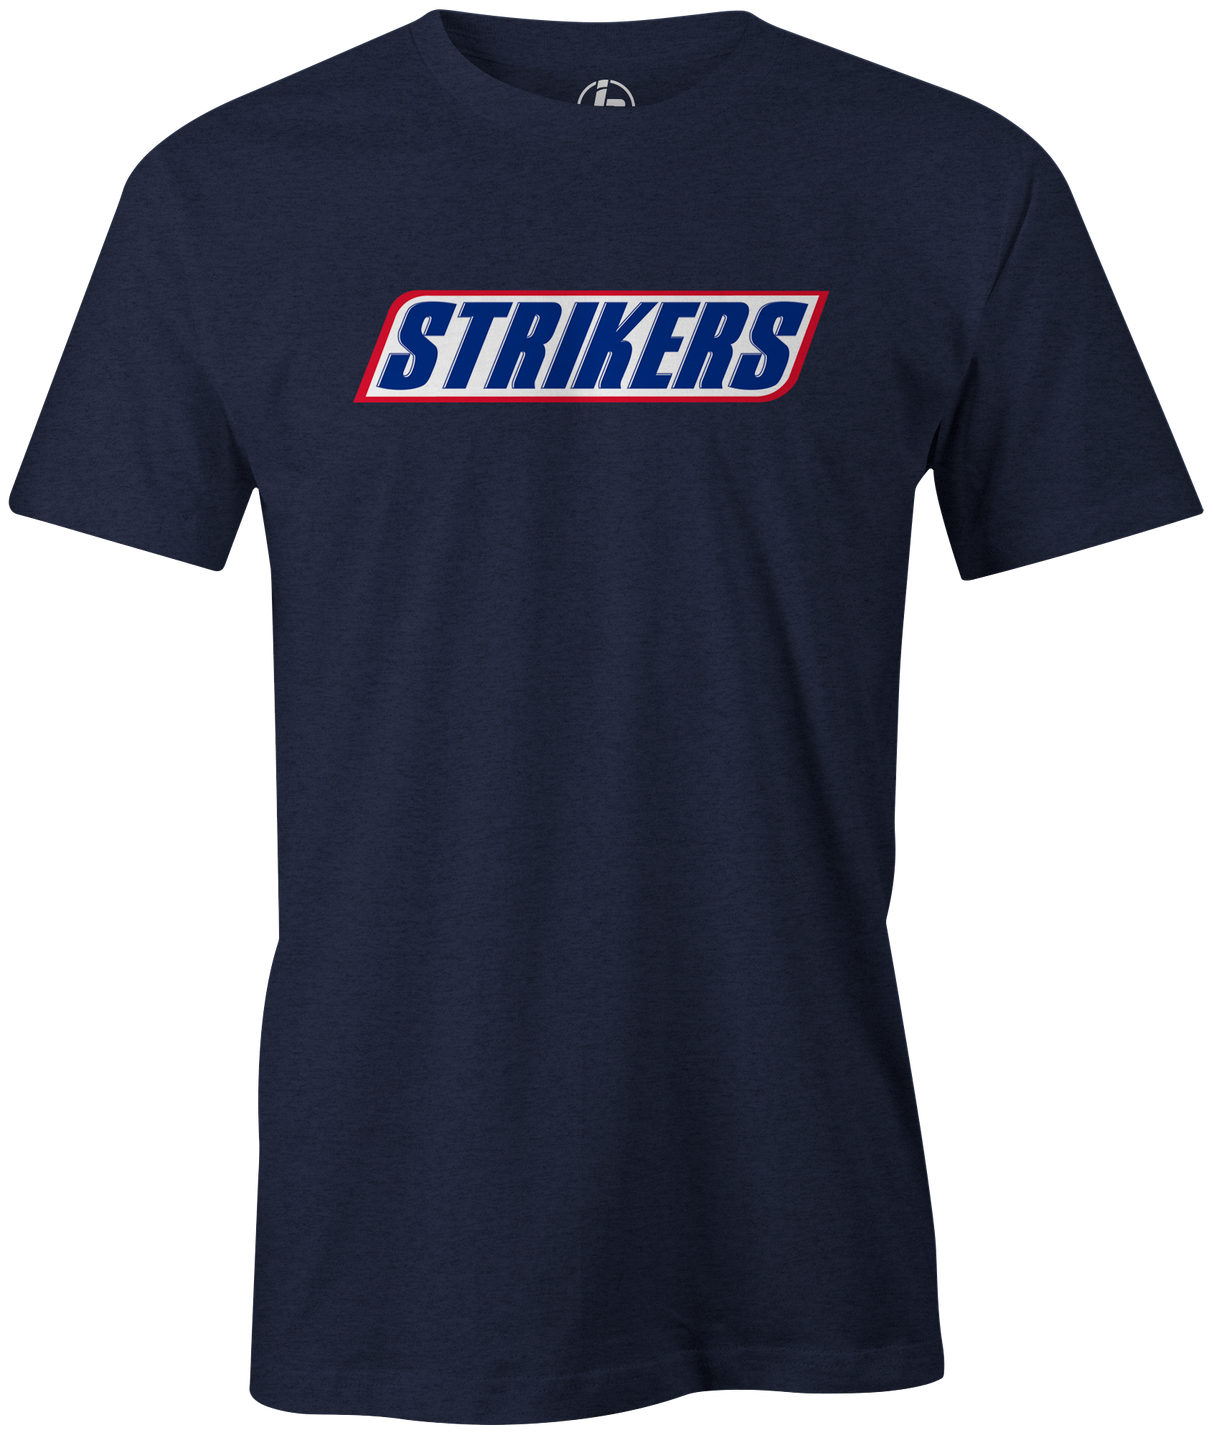 Strikers snickers candy bar bowling shirt novelty funny tshirts tshirt tees league team brown pop culture